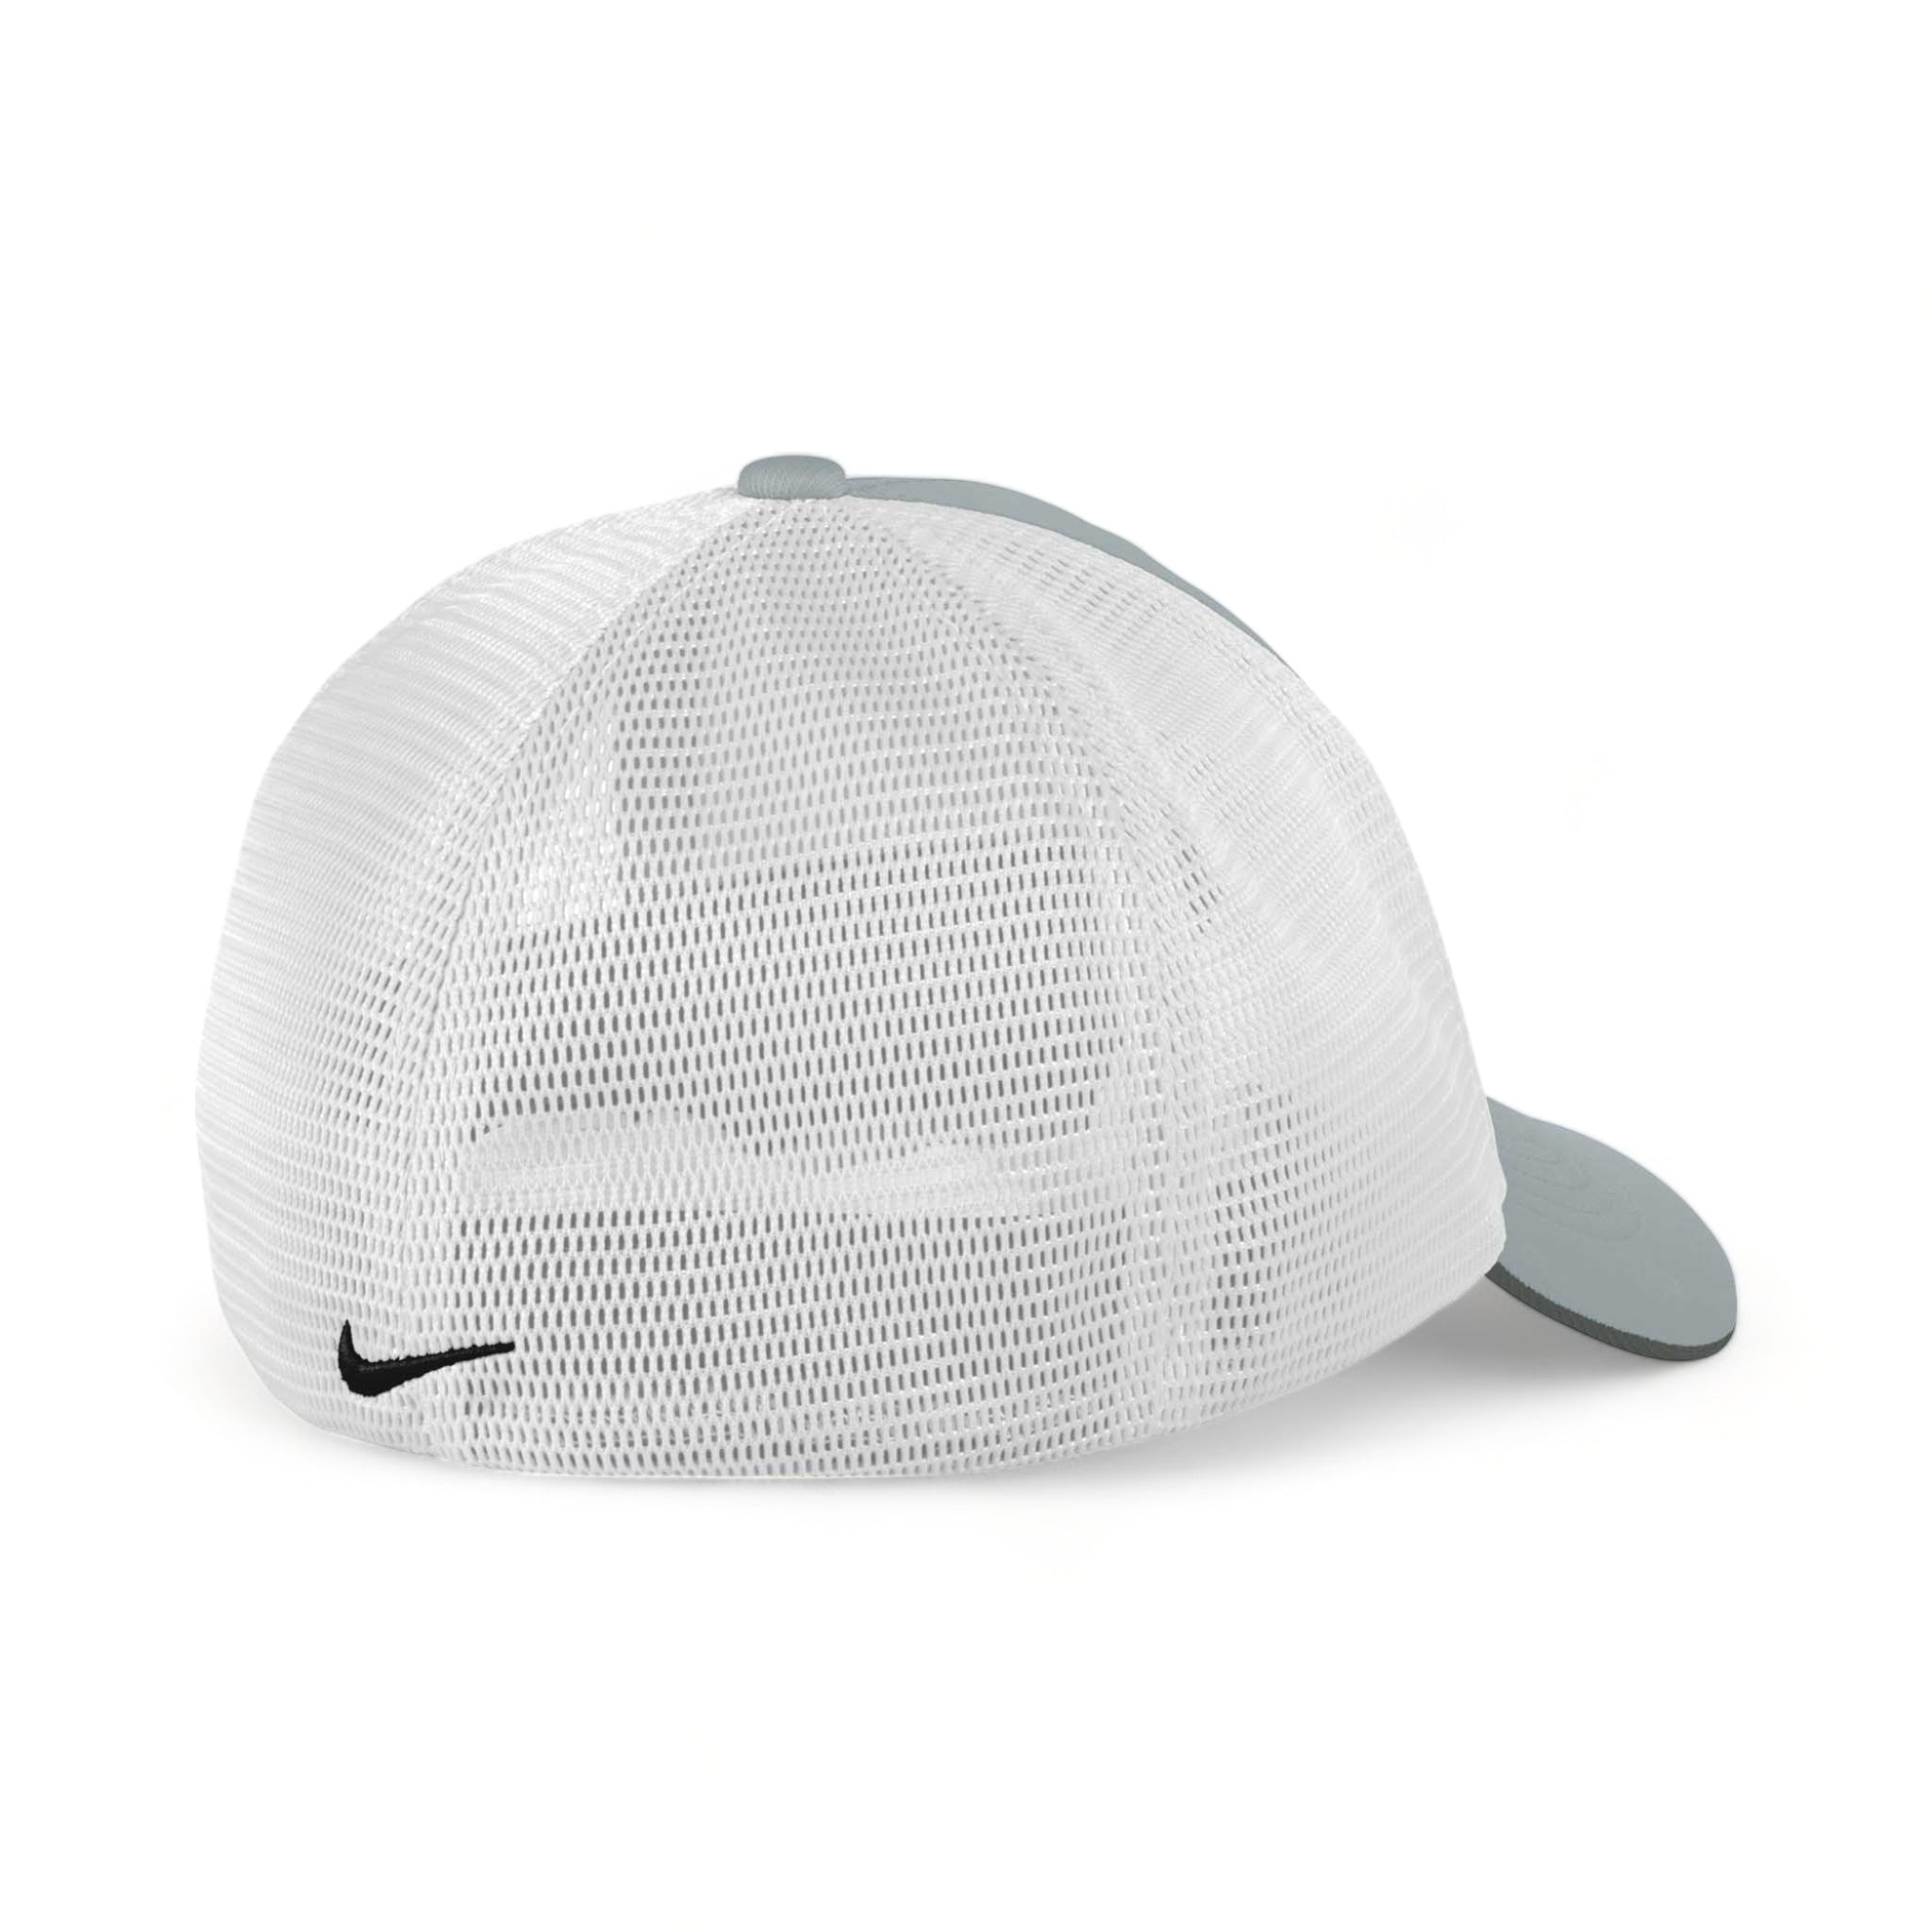 Back view of Nike NKFB6448 custom hat in cool grey and white